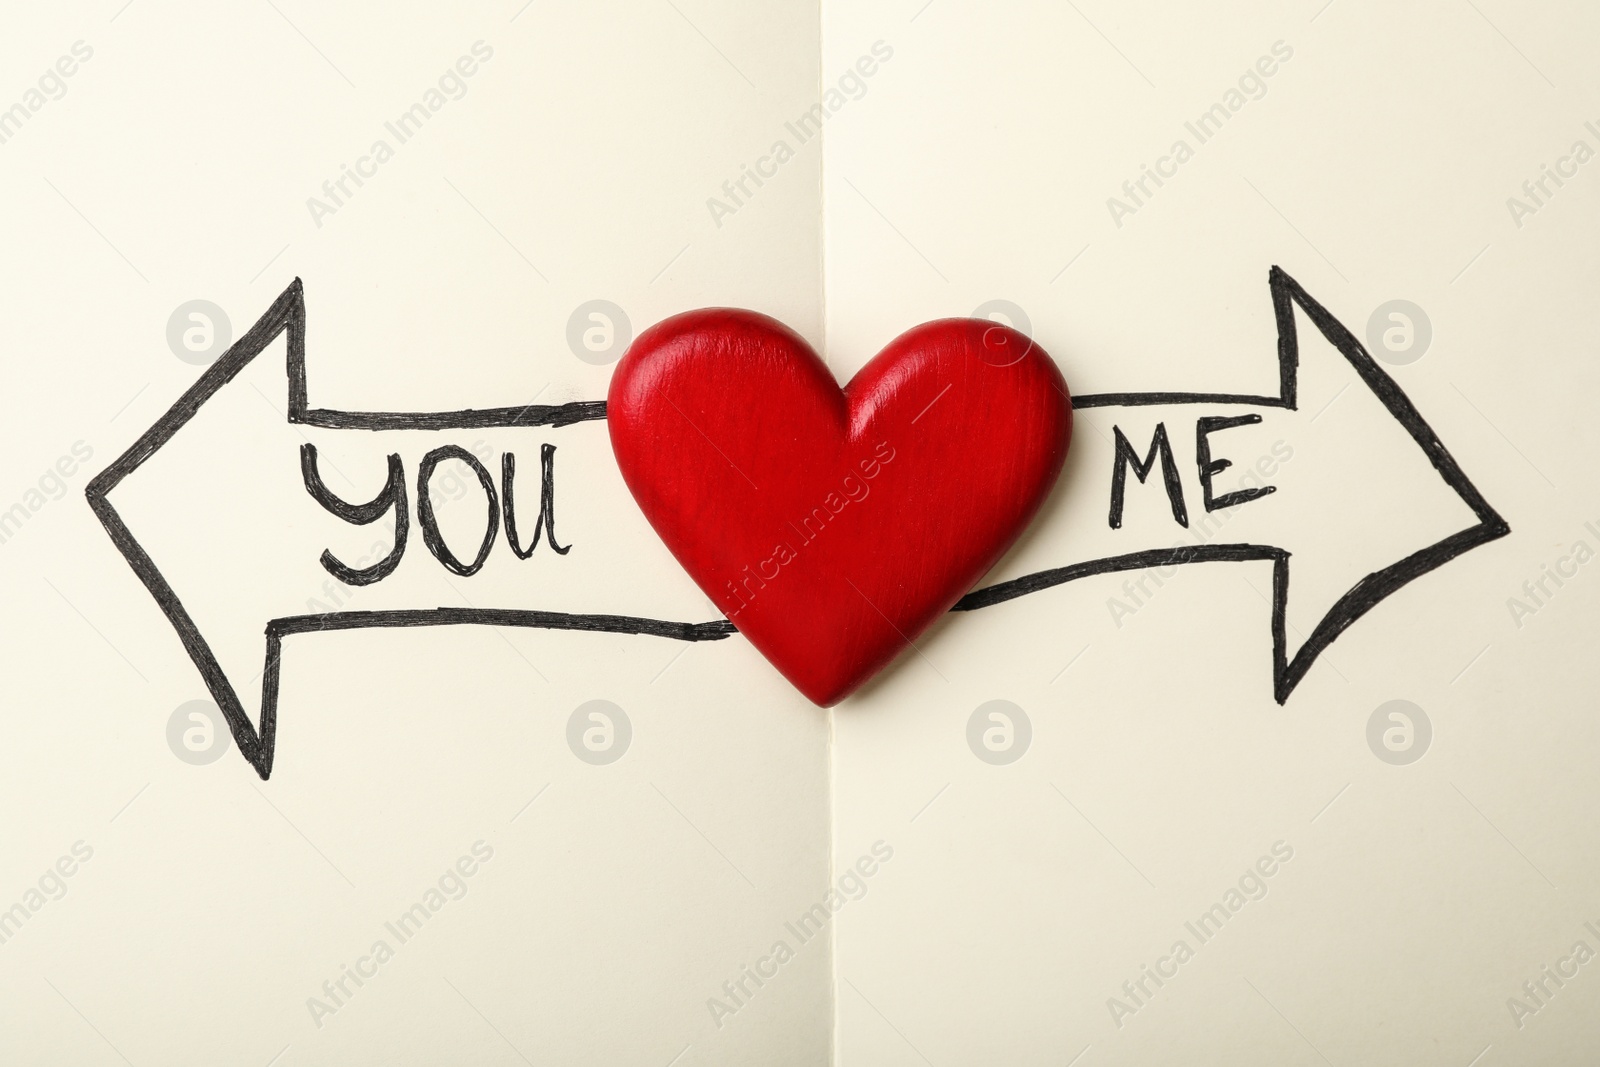 Photo of Heart between arrows with words YOU and ME pointing in different directions on notepad, top view. Composition symbolizing relationship problems